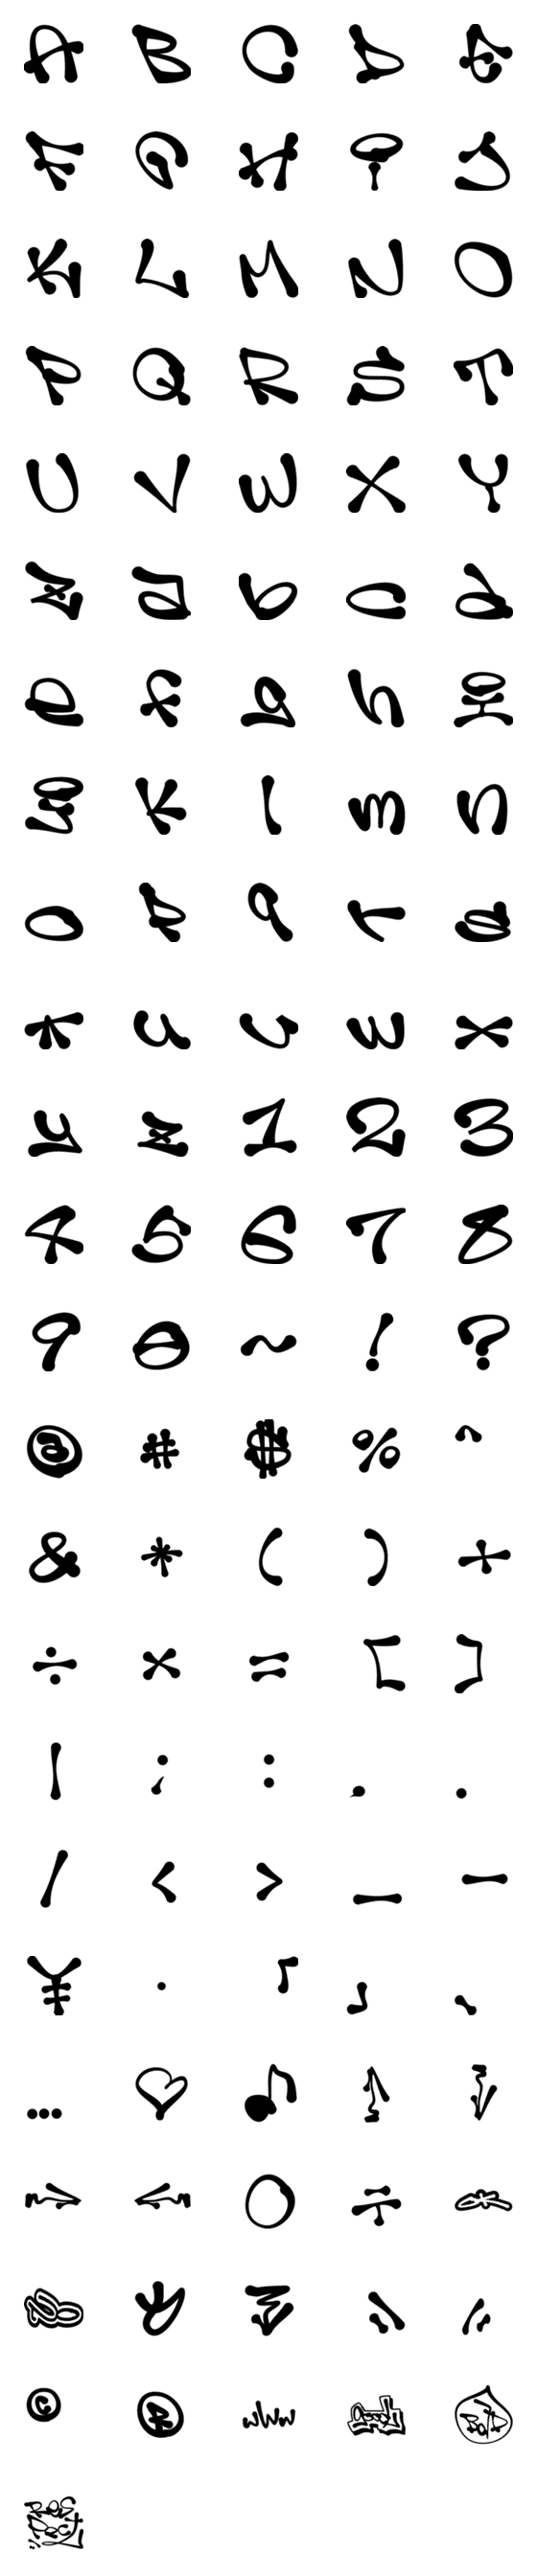 [LINE絵文字]←英語で使えるグラフィティ風デコ文字→の画像一覧